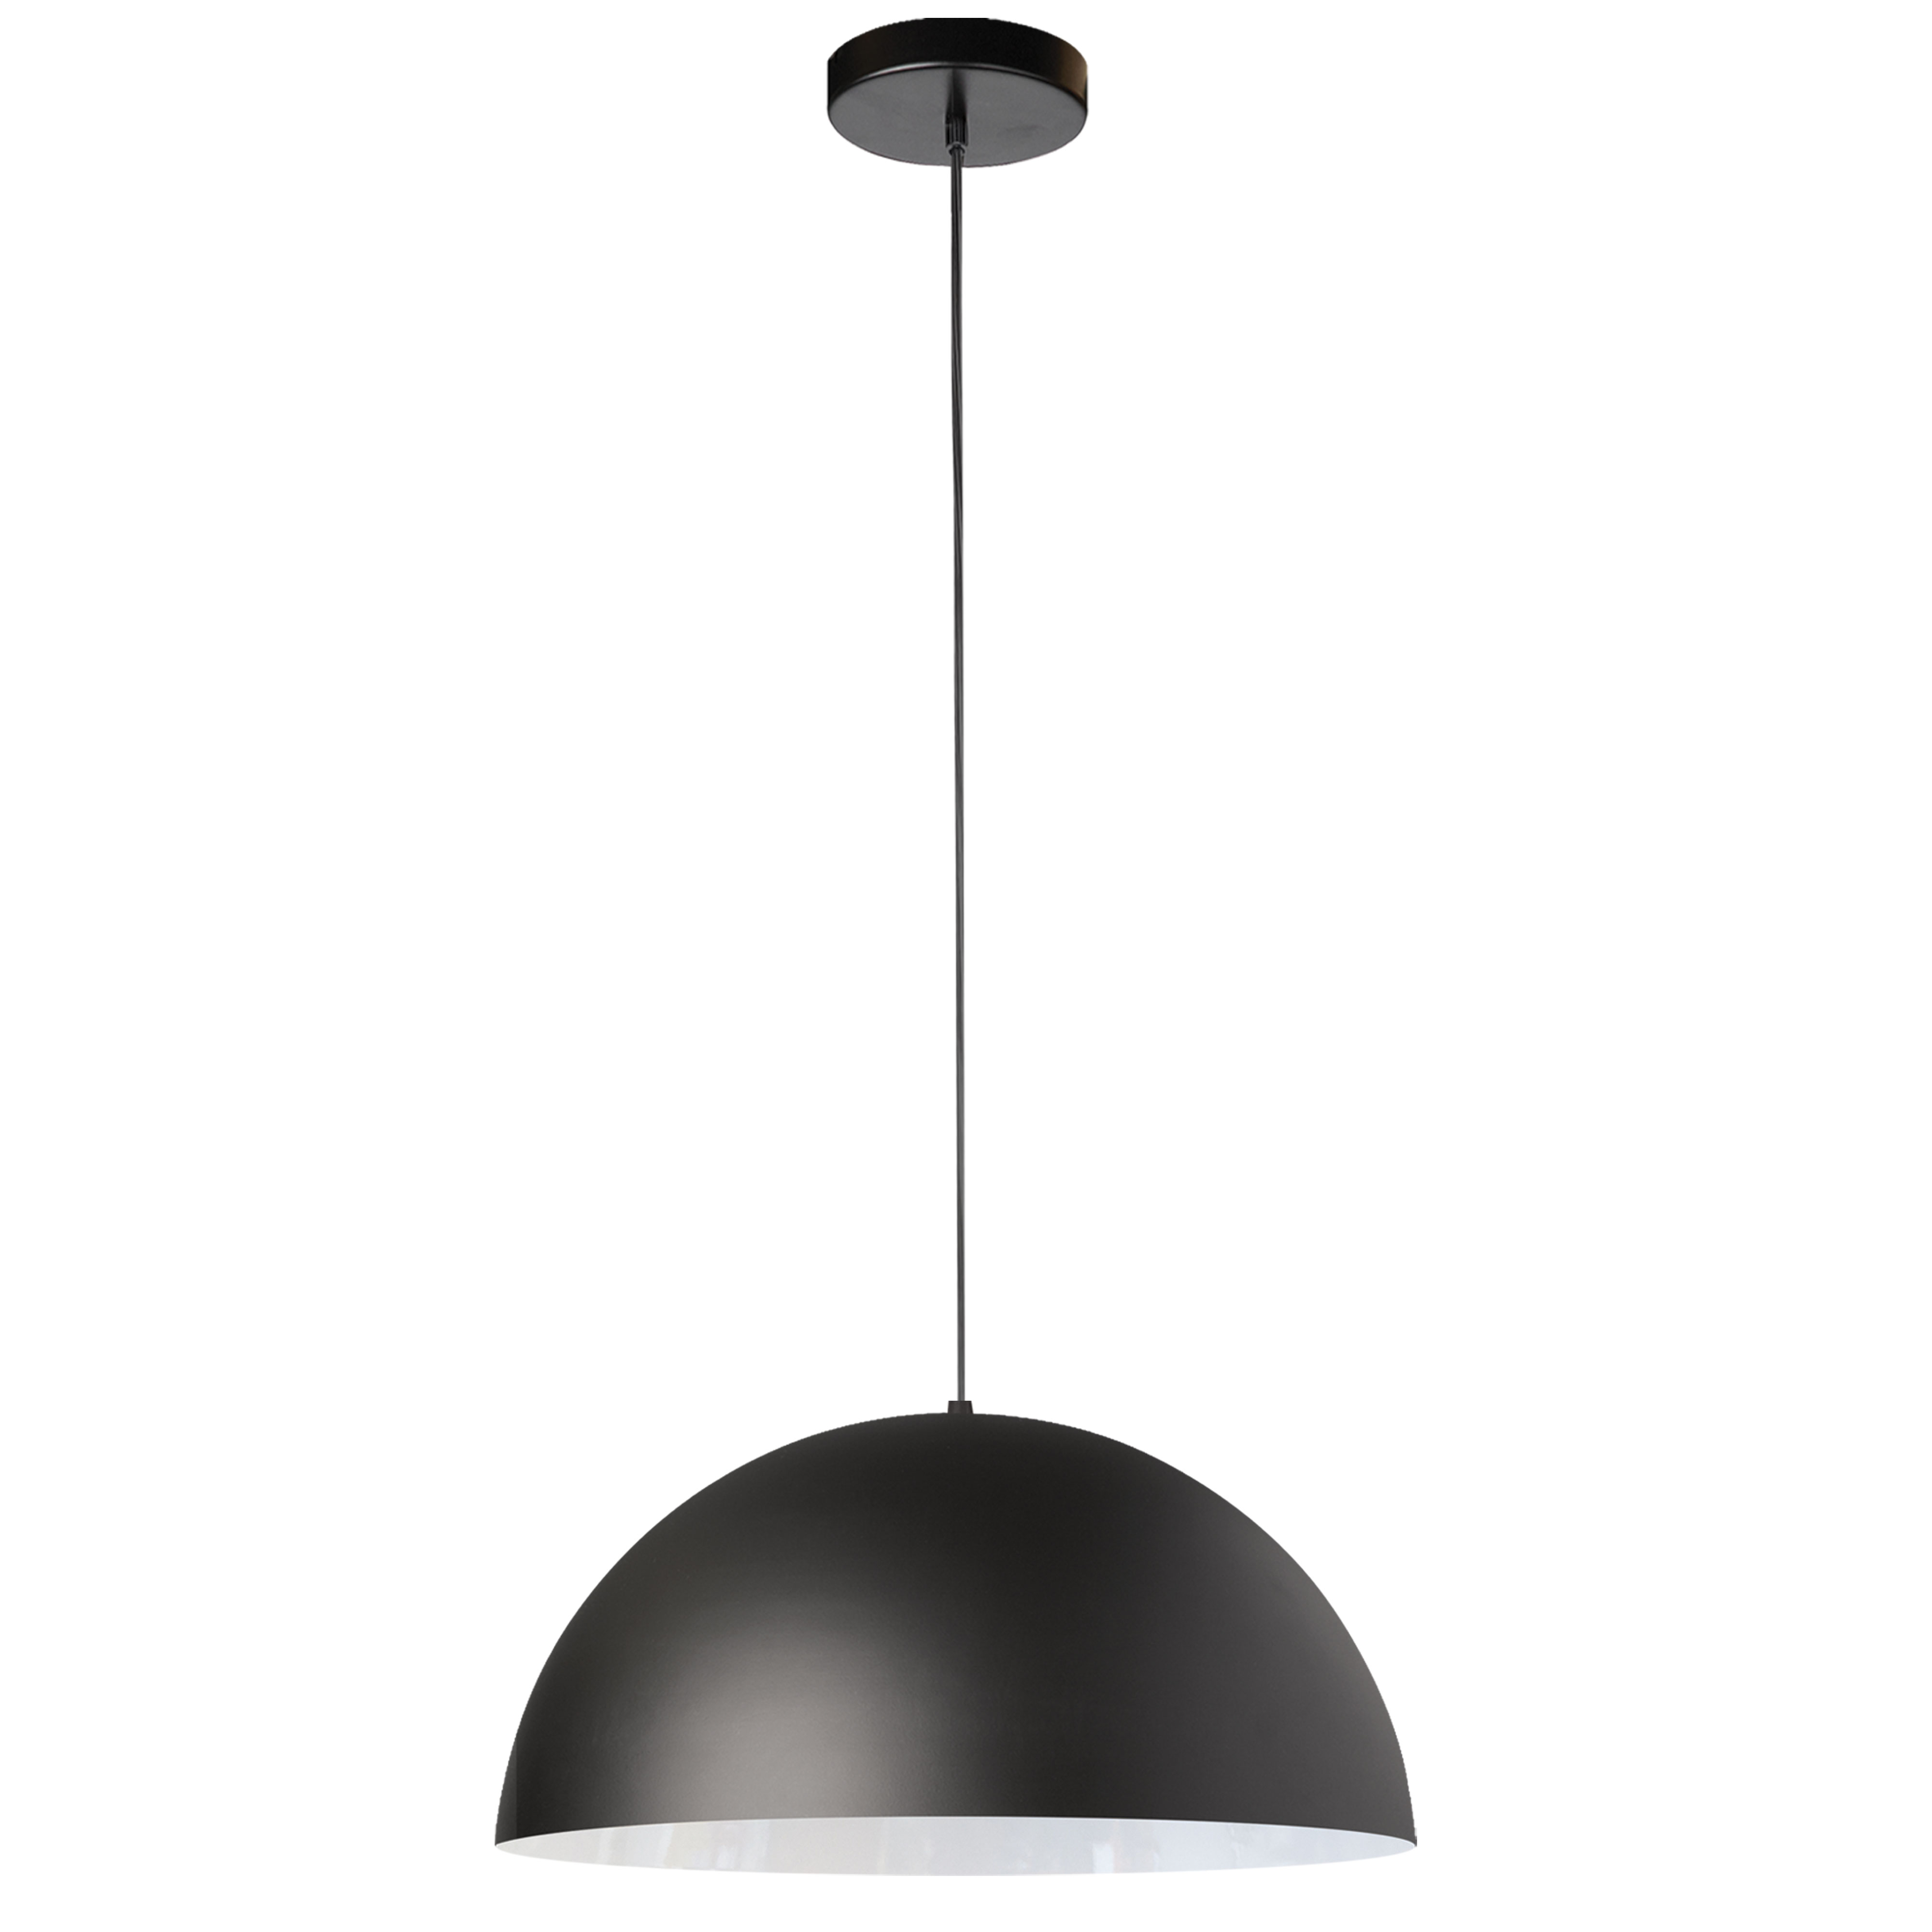 With a sleek yet substantial silhouette, the Ofelia family of lighting sports an iconic look that can work within the framework of mid-century to ultra-modern décors. Ofelia lighting adds clean lines and appealing curves that will enhance minimalist and modern furnishings. The all metal design drops to a dome shade, with color options that include monochromatic as well as contrasting inner and outer finishes. It's a sturdy design, offering bright illumination as well as style. Ofelia lighting will add a nice contrast to the smooth surfaces of a kitchen, and add an artistic presence to a foyer or main hallway.